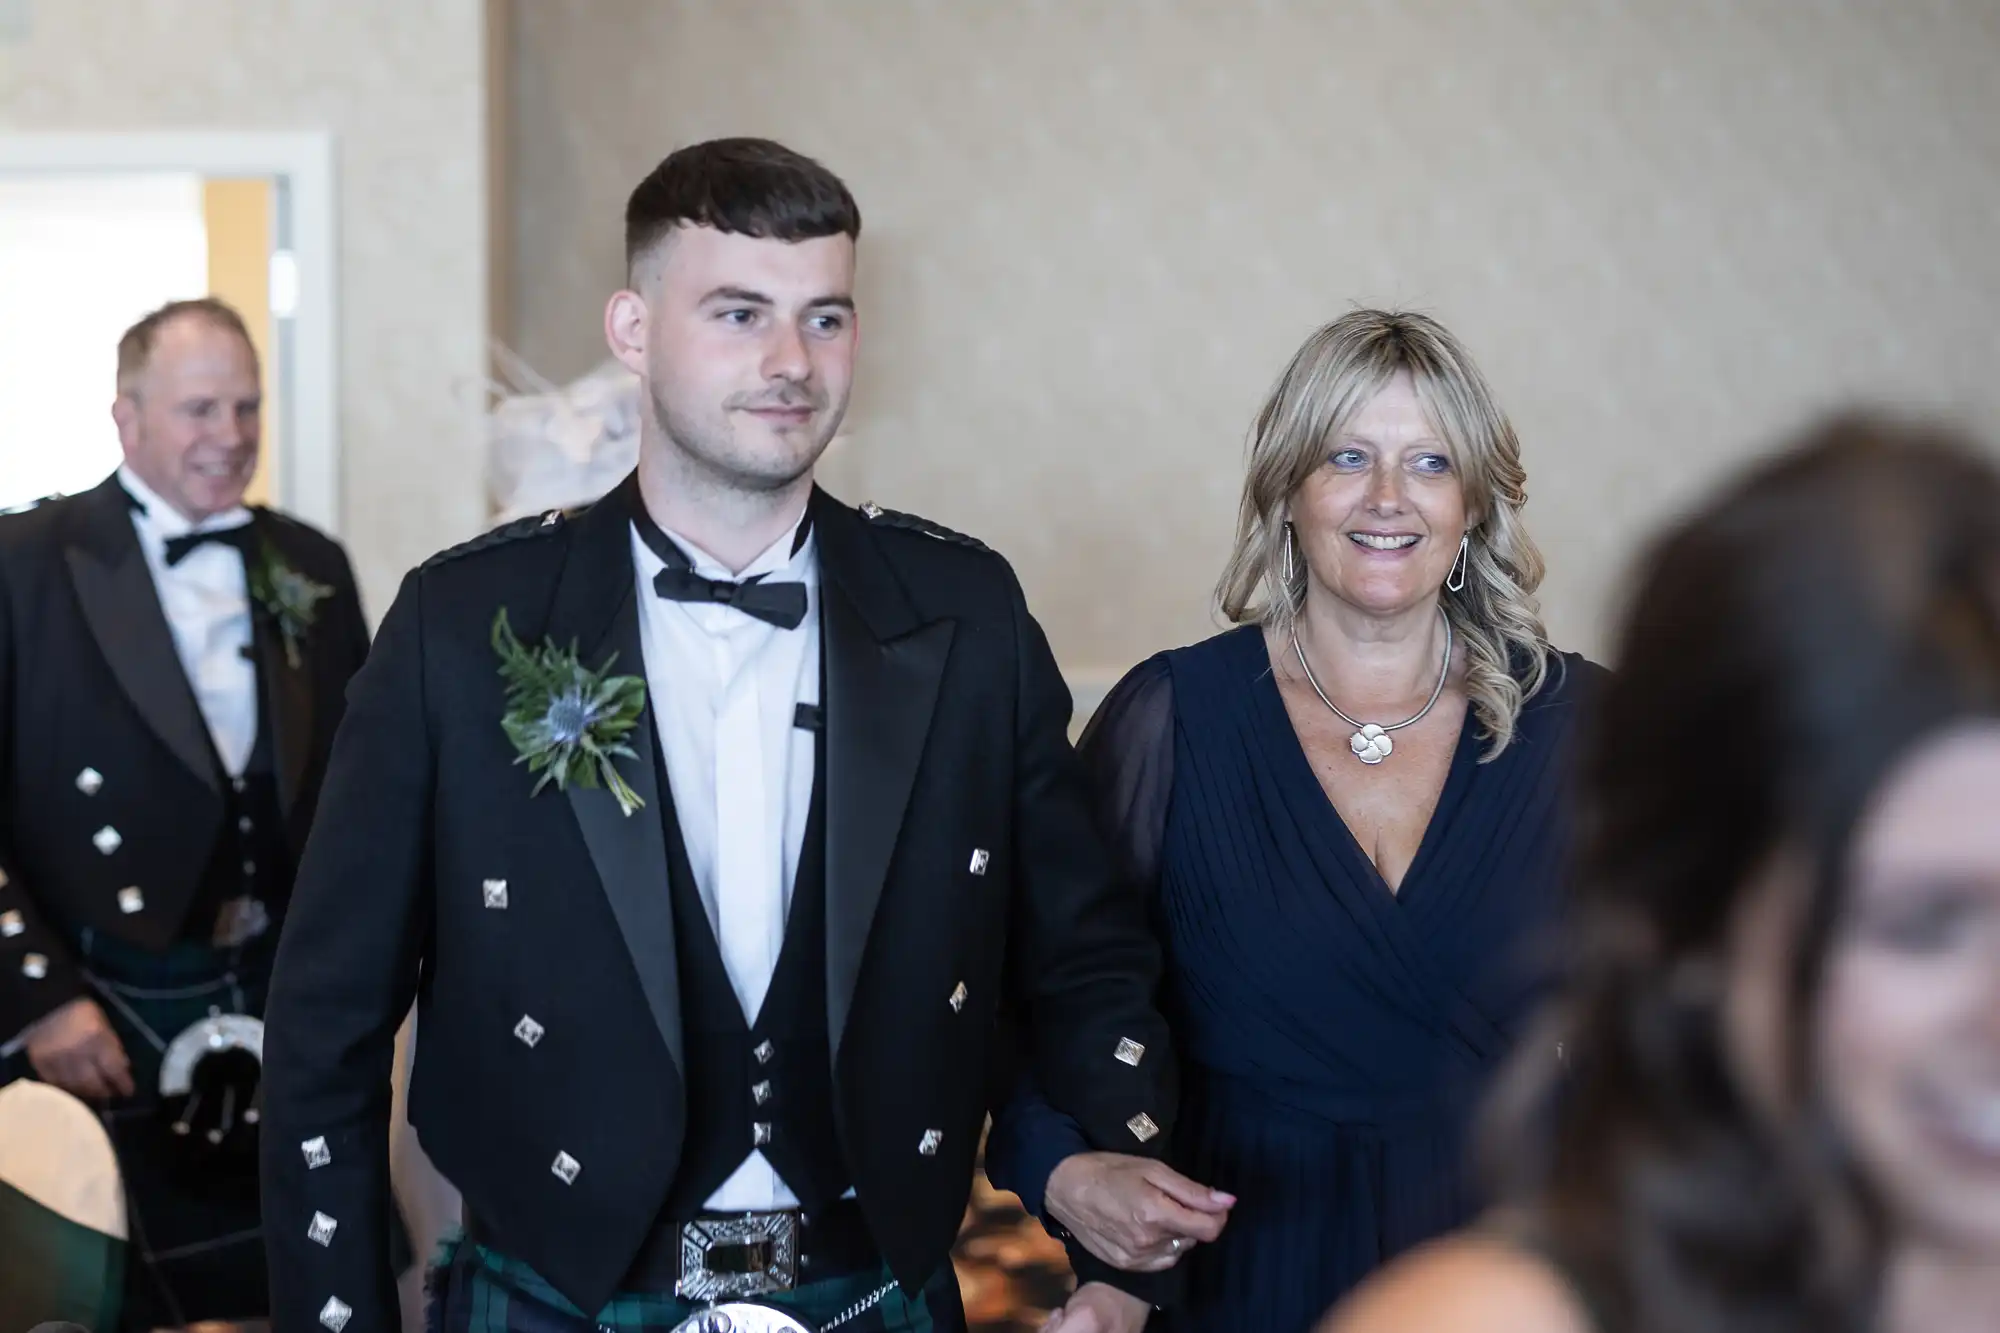 A young man in a kilt and a middle-aged woman walk together smiling in a crowded room during a festive event.